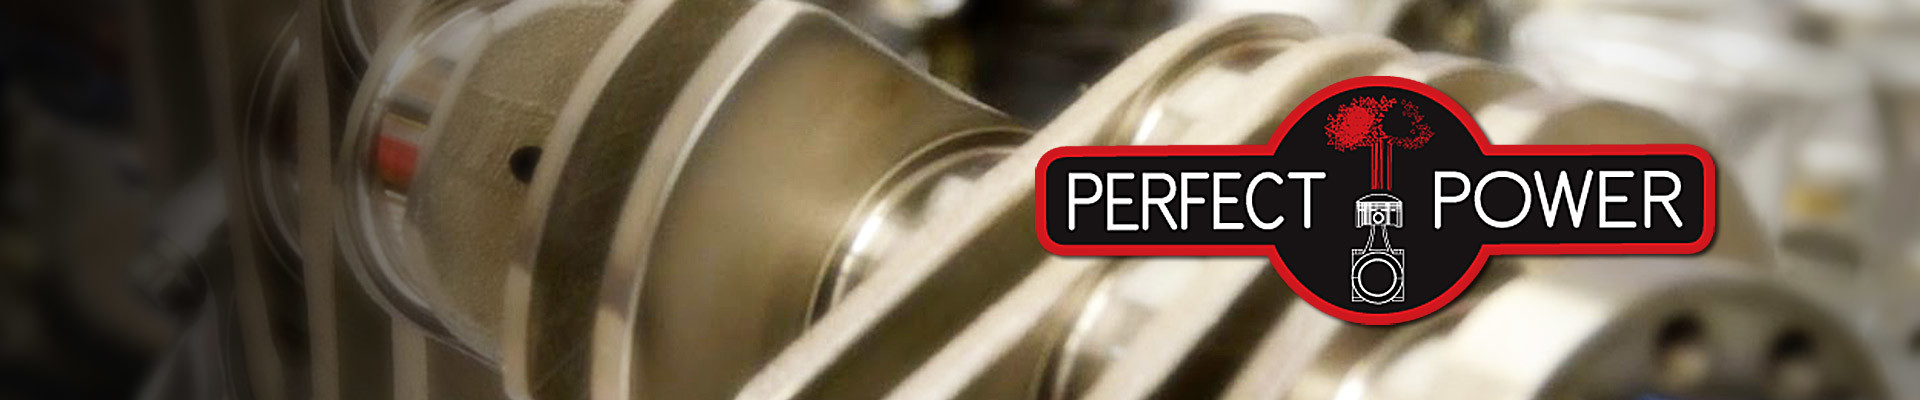 Porsche Repair in Buffalo Grove, IL by Perfect Power a specialist Porsche repair shop in Illinois specializing in Porsche repair, maintenance, performance tuning and service.